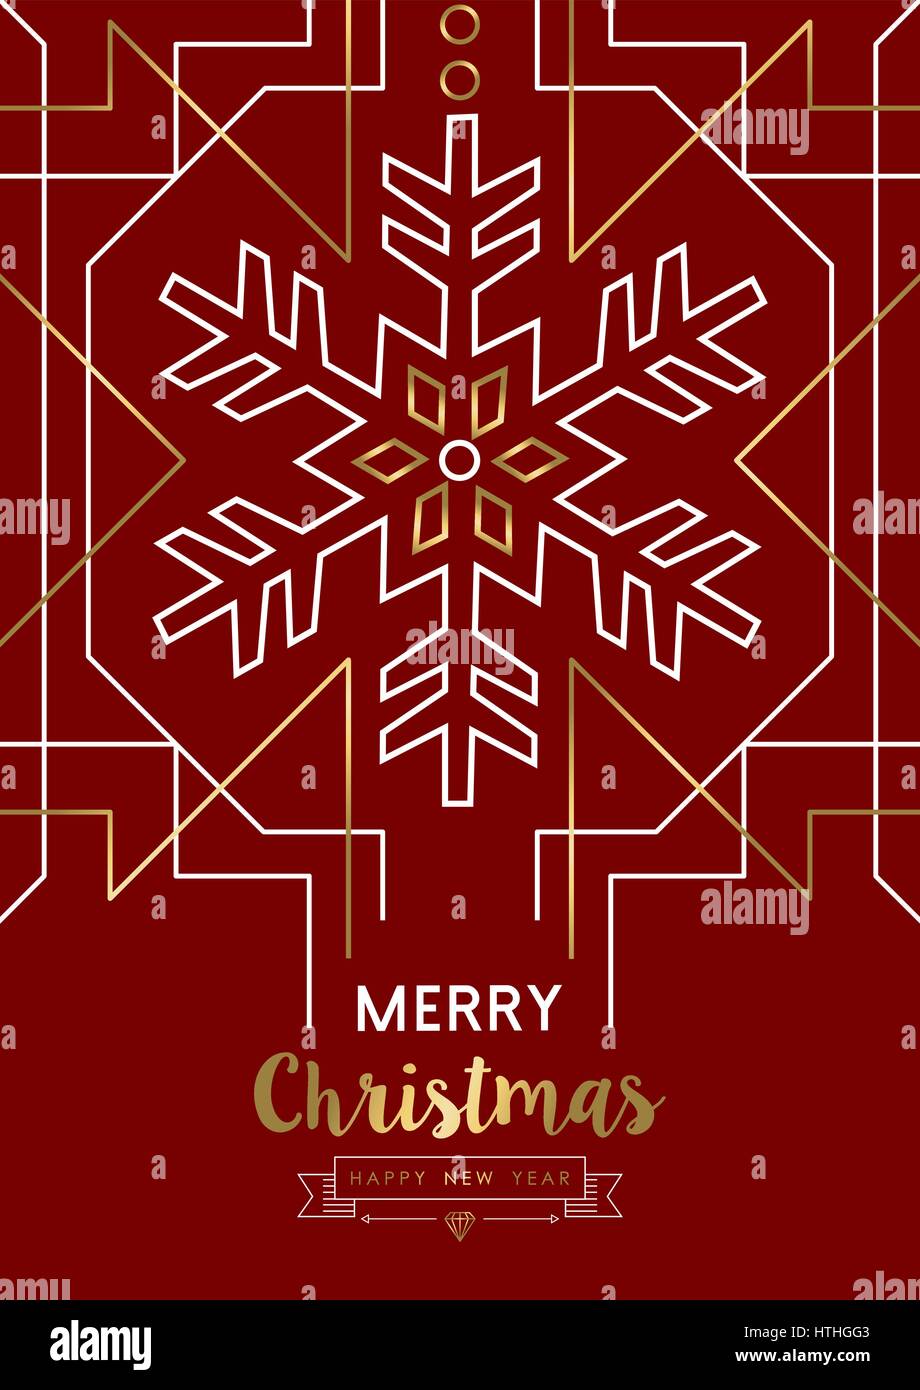 Merry Christmas Happy New Year snowflake frame design in gold art deco retro style. Ideal for elegant holiday party invitation, xmas greeting card or  Stock Vector